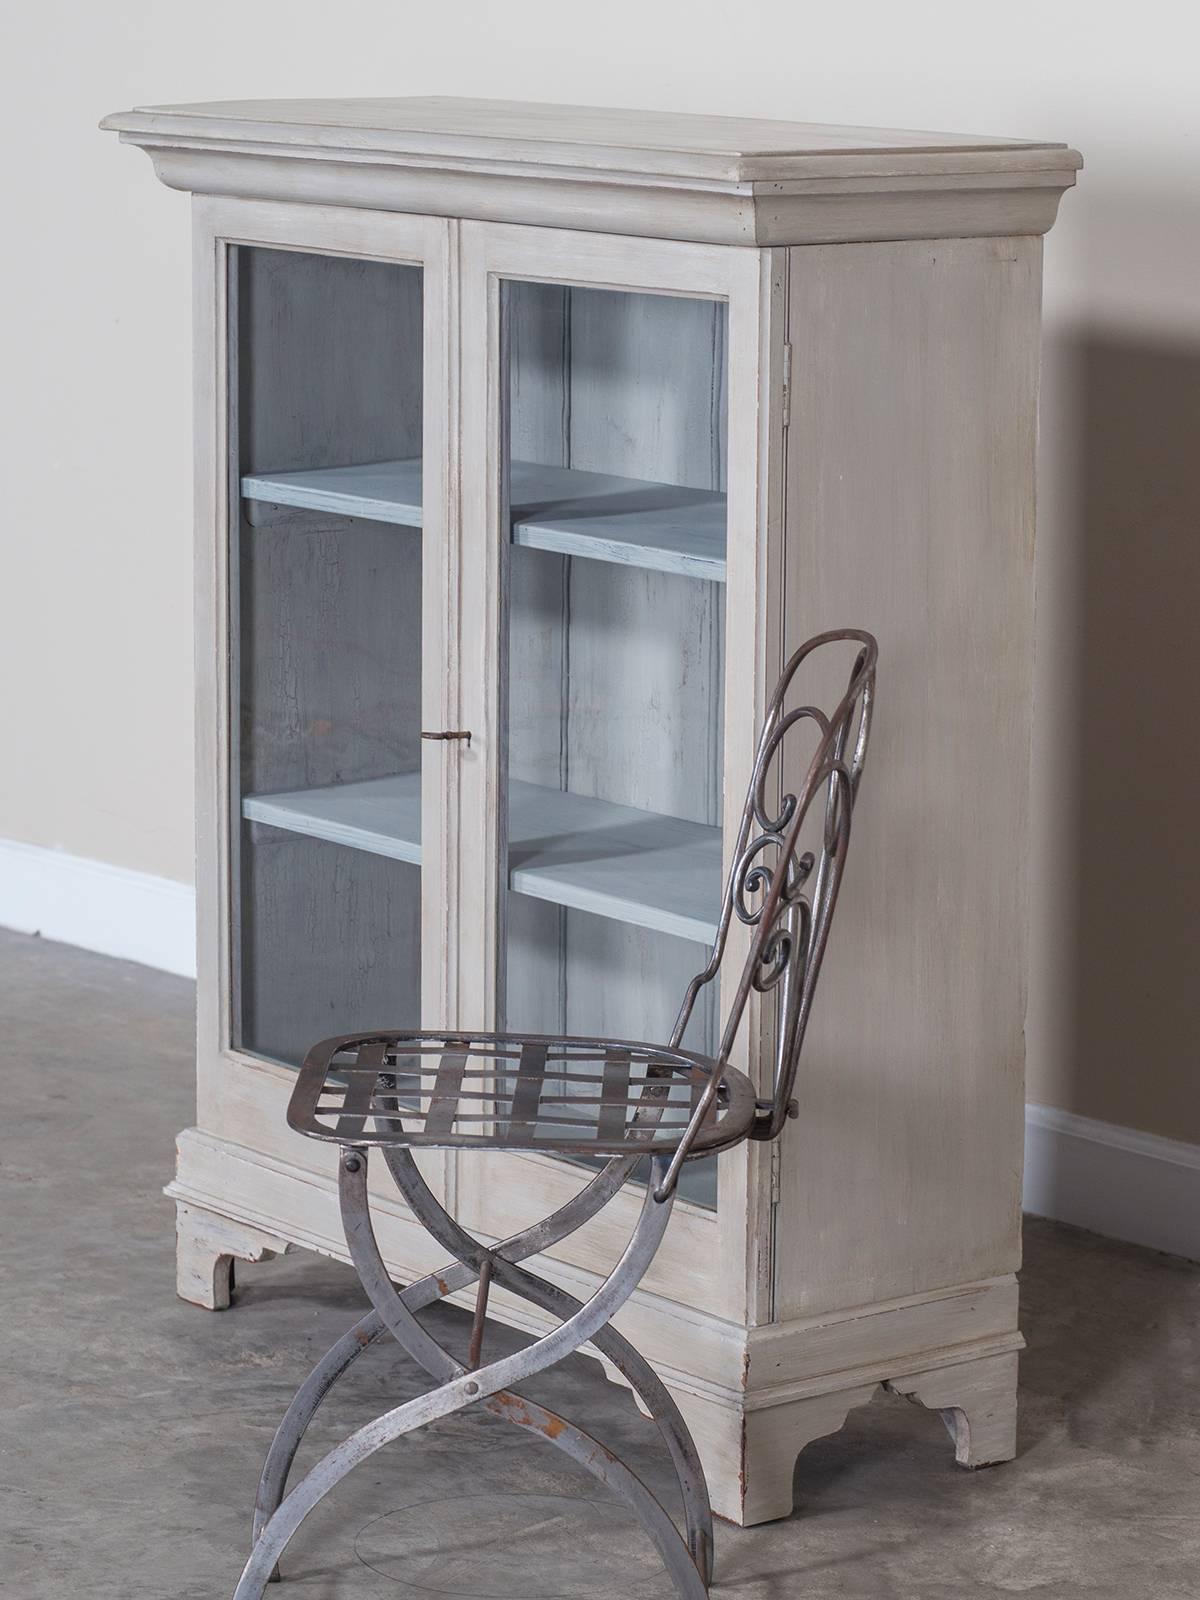 Late 19th Century Antique English Painted Bookcase Display Cabinet, circa 1875